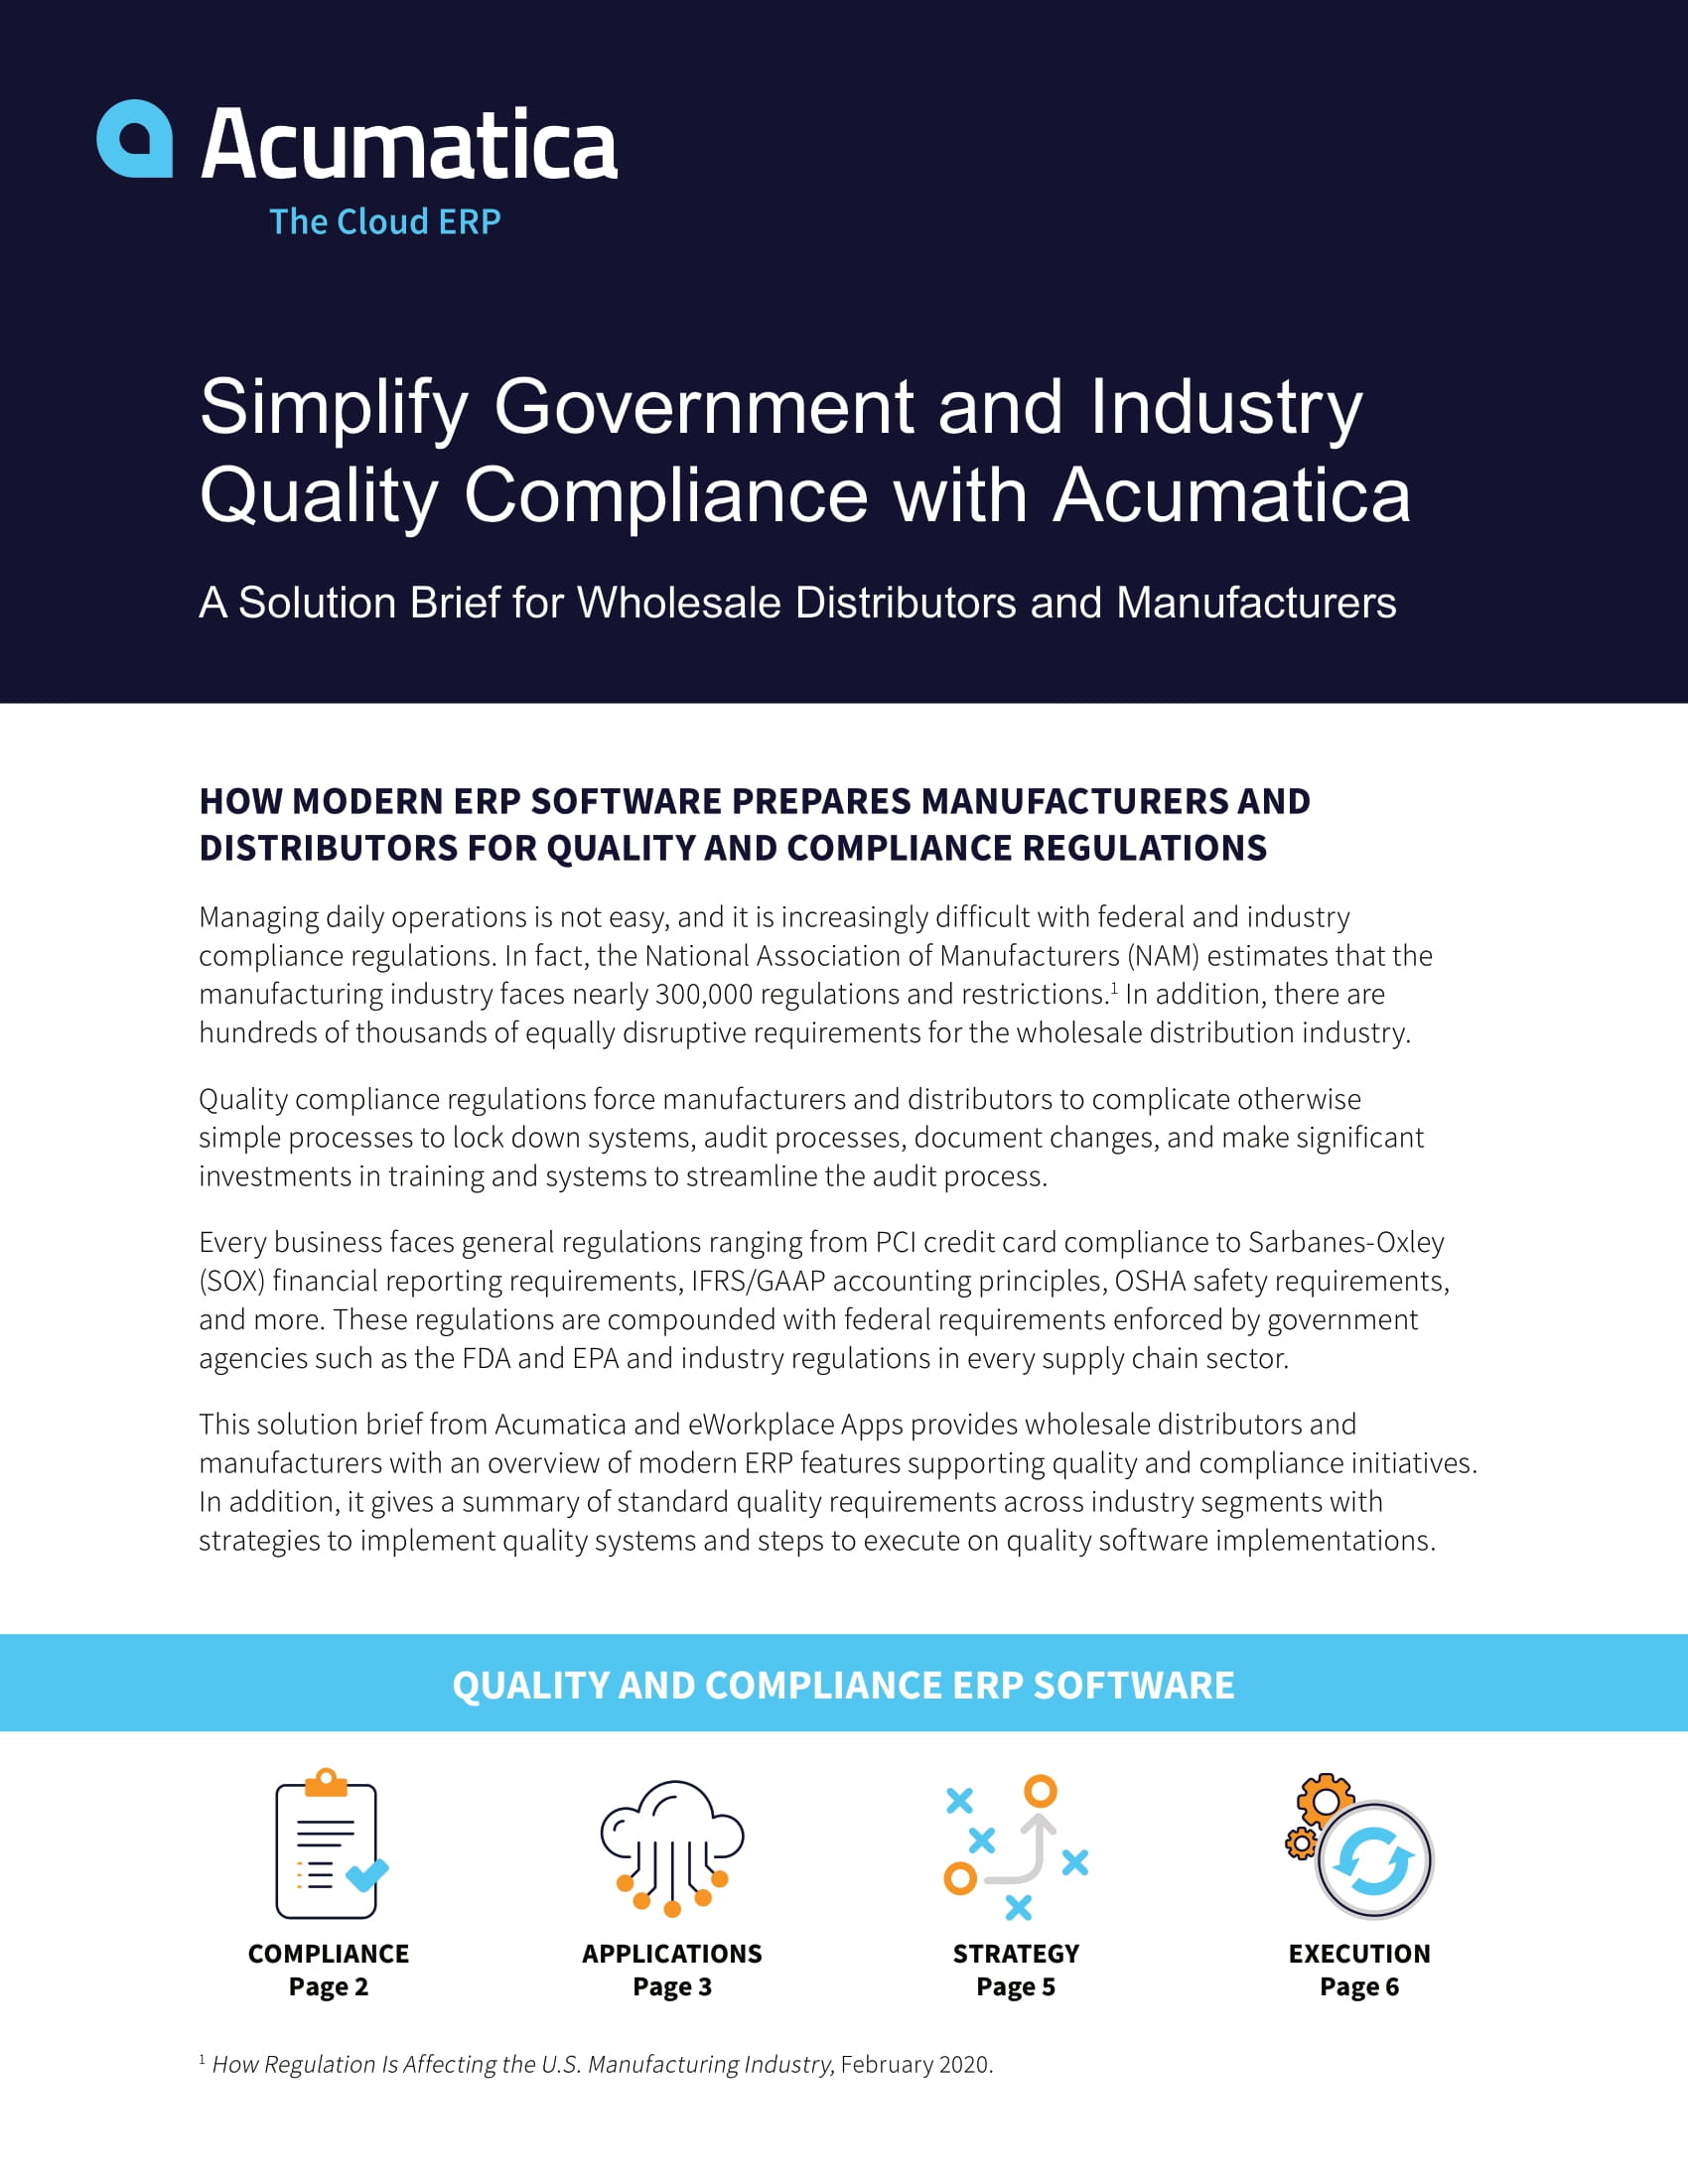 Simplify Compliance with Quality Management ERP Software